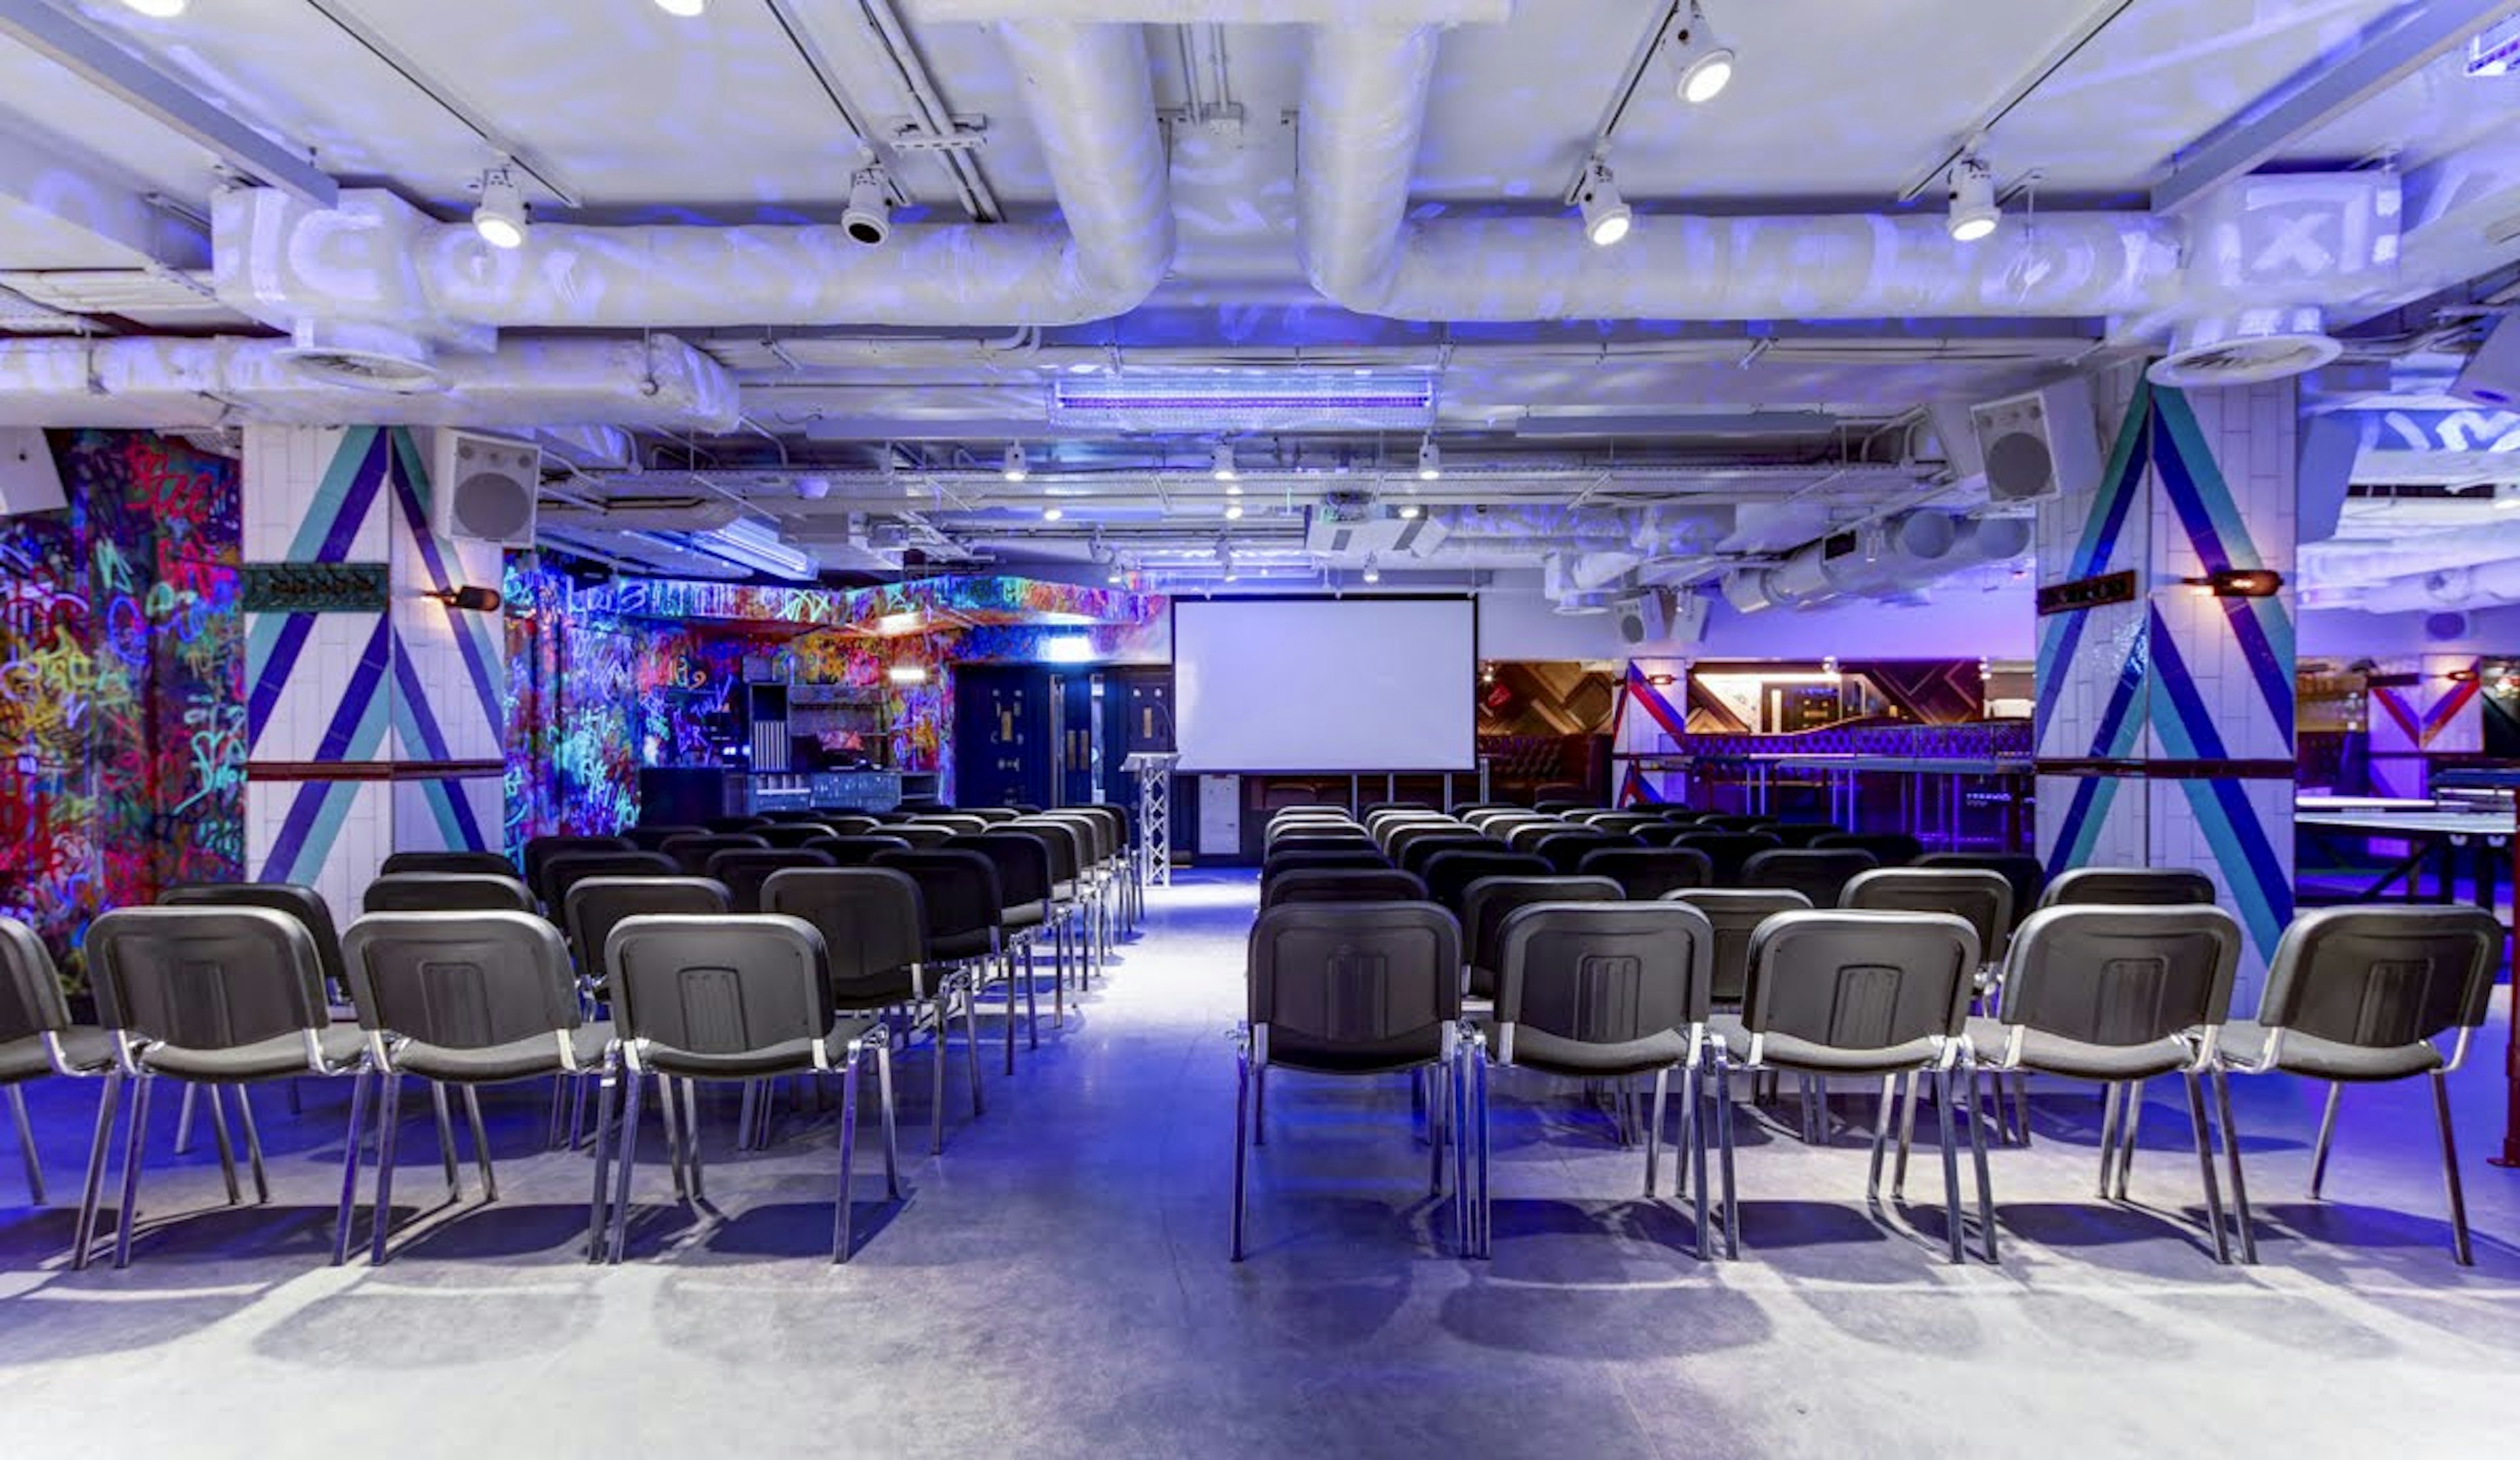 Presentation Venues - Bounce, the home of Ping Pong | Old Street - Business in Conference Space - Banner